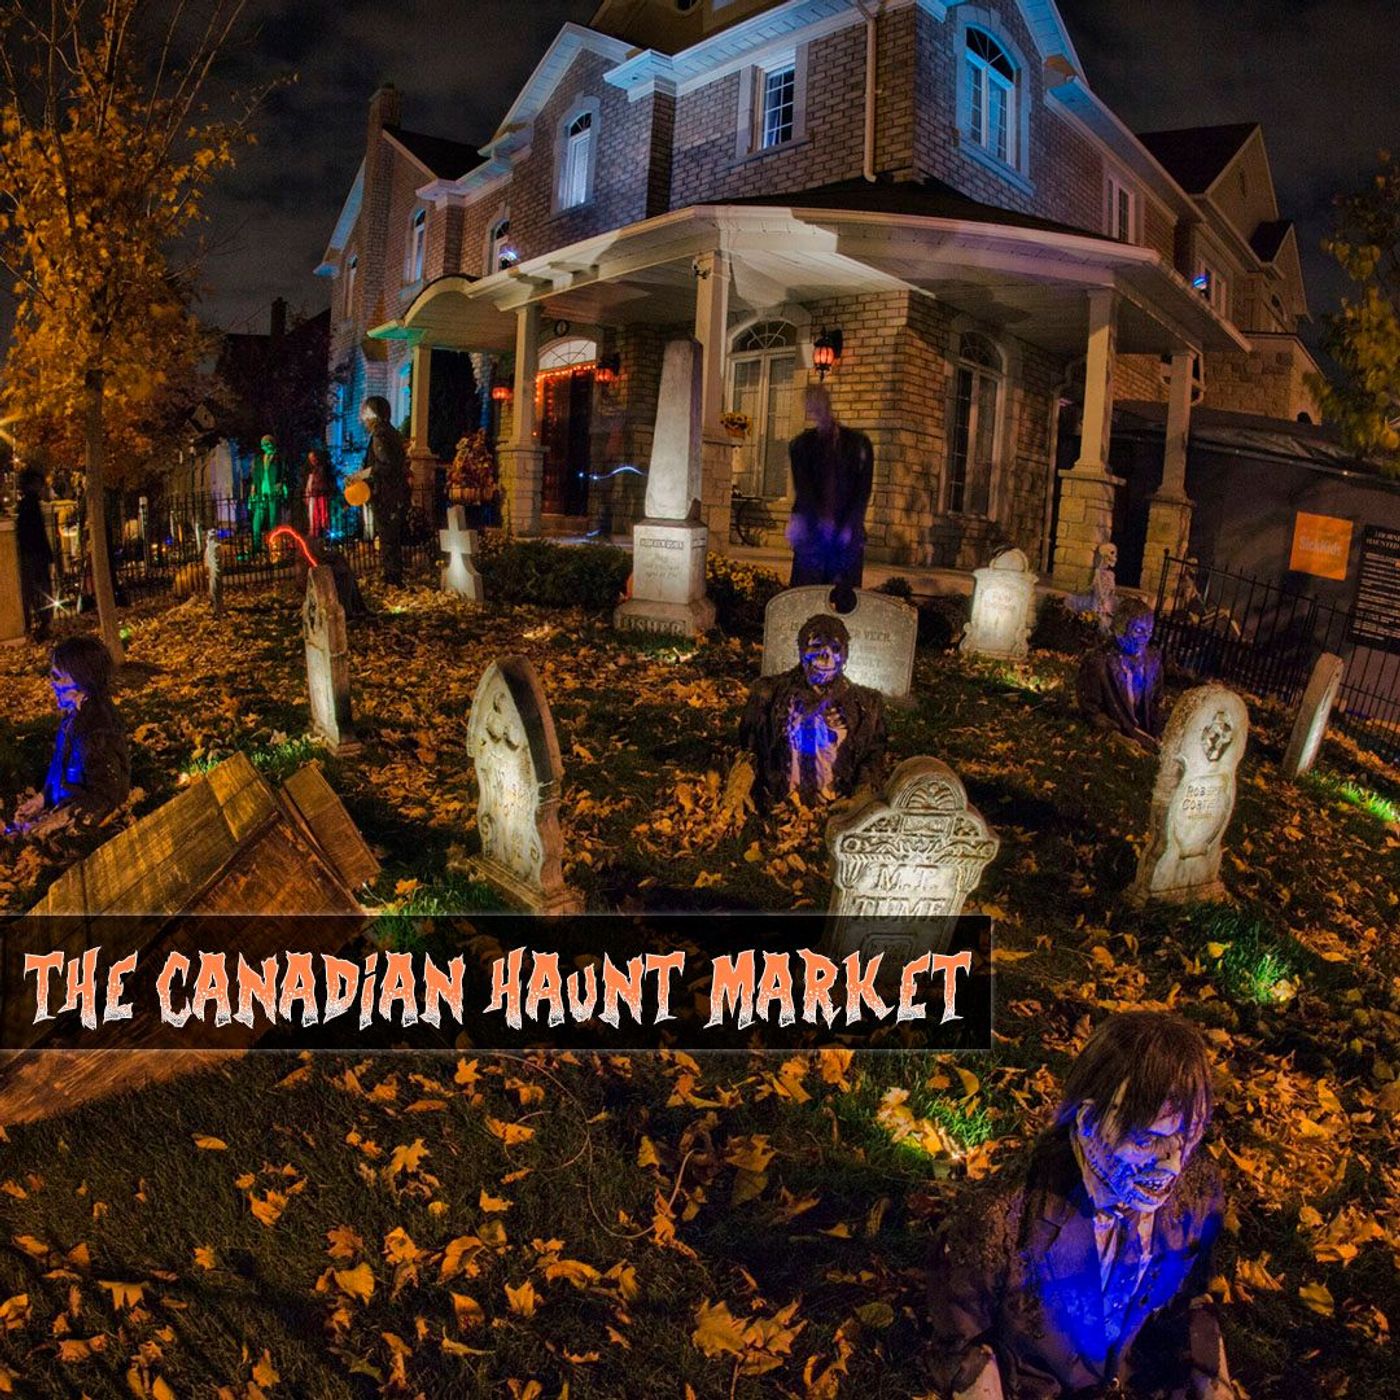 An Introduction To The Canadian Haunt Market